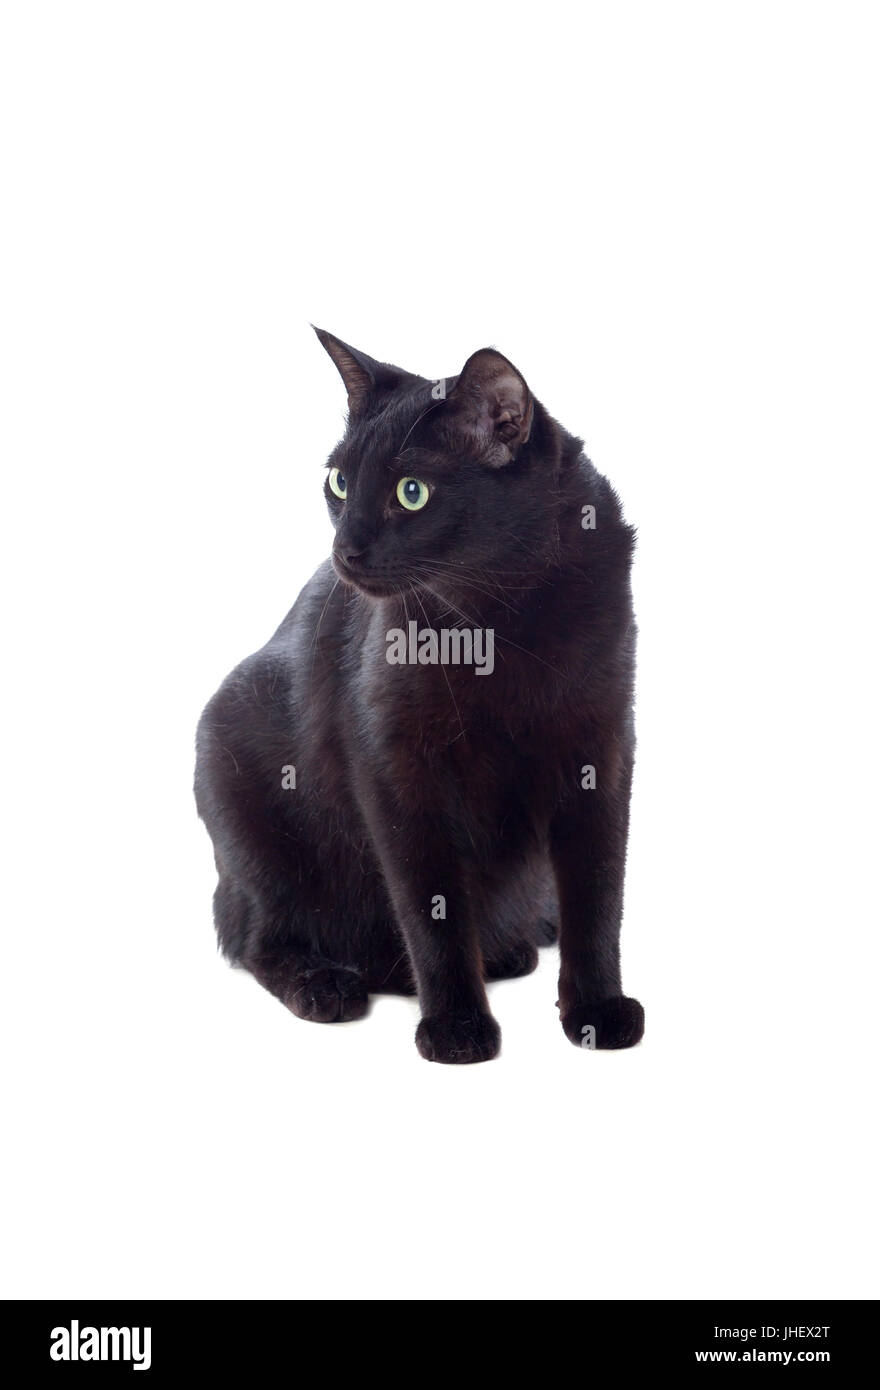 Black cat with yellow eyes isolated on a whit background Stock Photo